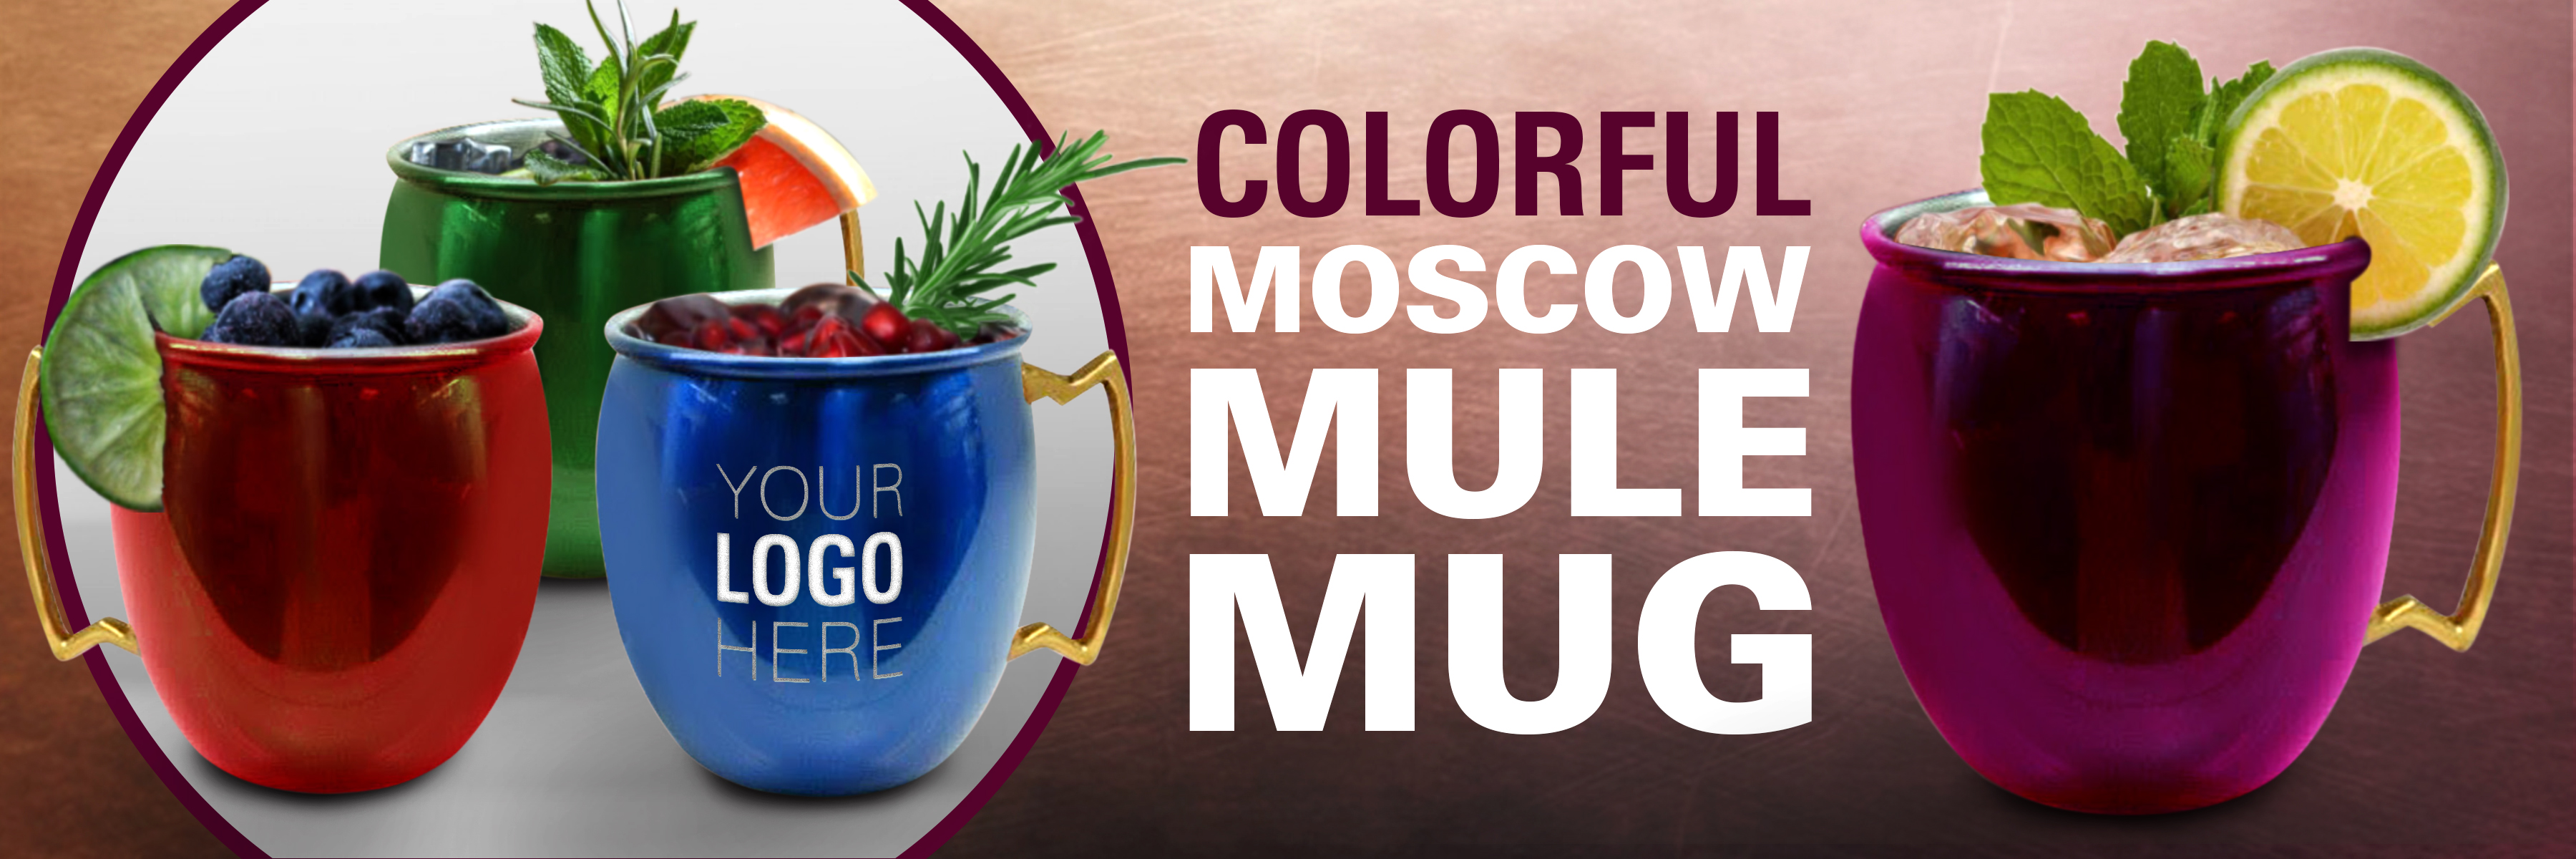 Colorful Moscow Mule Mug Banner